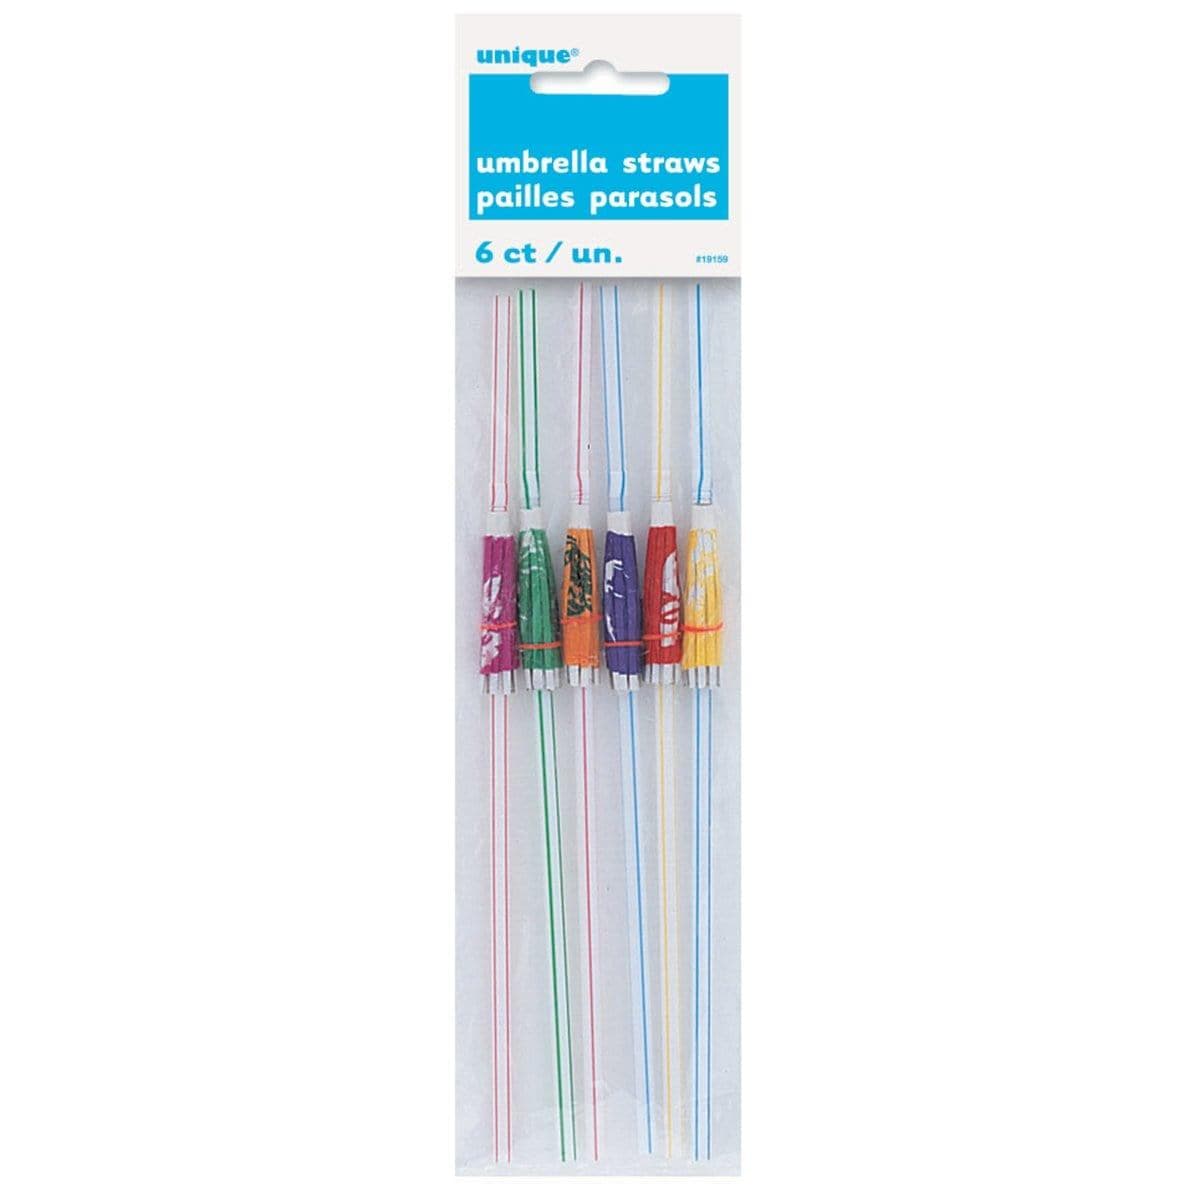 Buy Theme Party Luau Umbrella Straws, 6 per Package sold at Party Expert